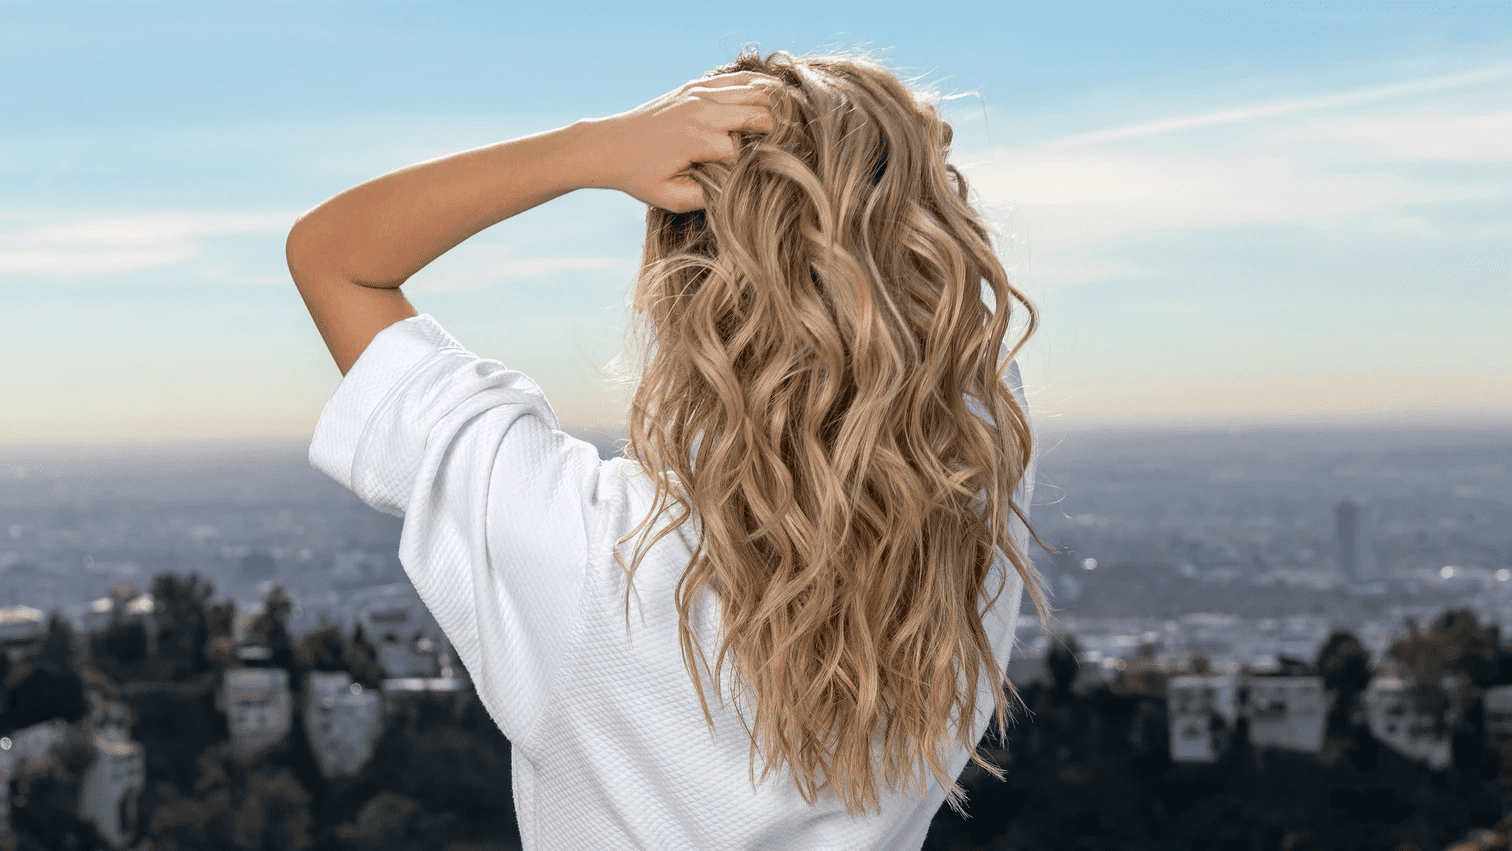 A 5-Step Plan to Getting Your Best Hair This Summer